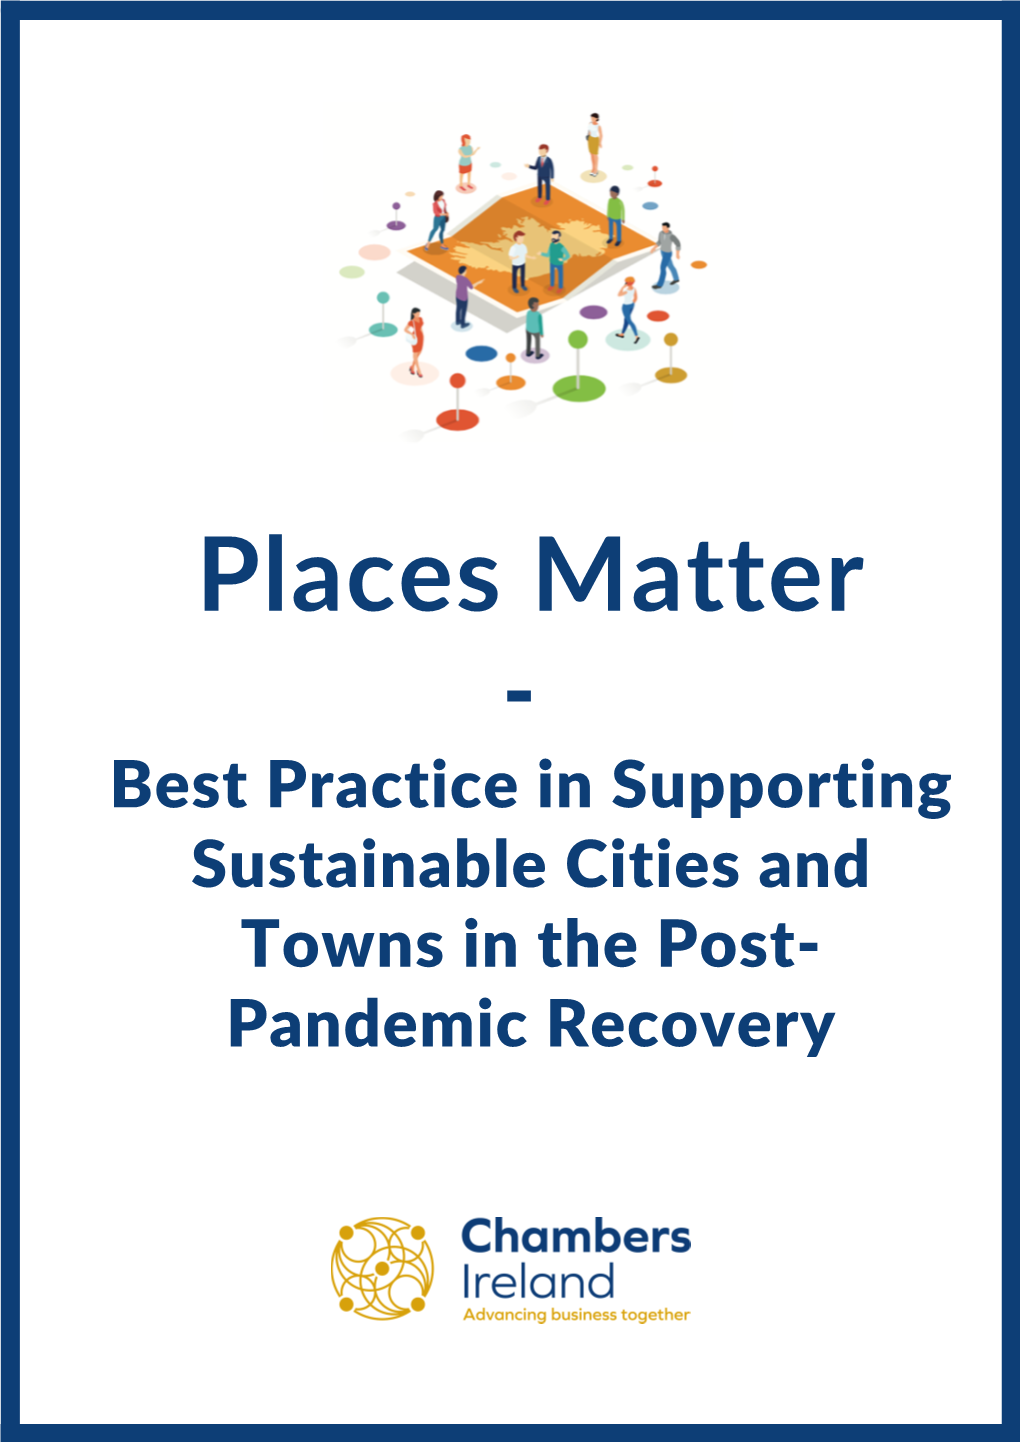 Places Matter - Best Practice in Supporting Sustainable Cities and Towns in the Post- Pandemic Recovery